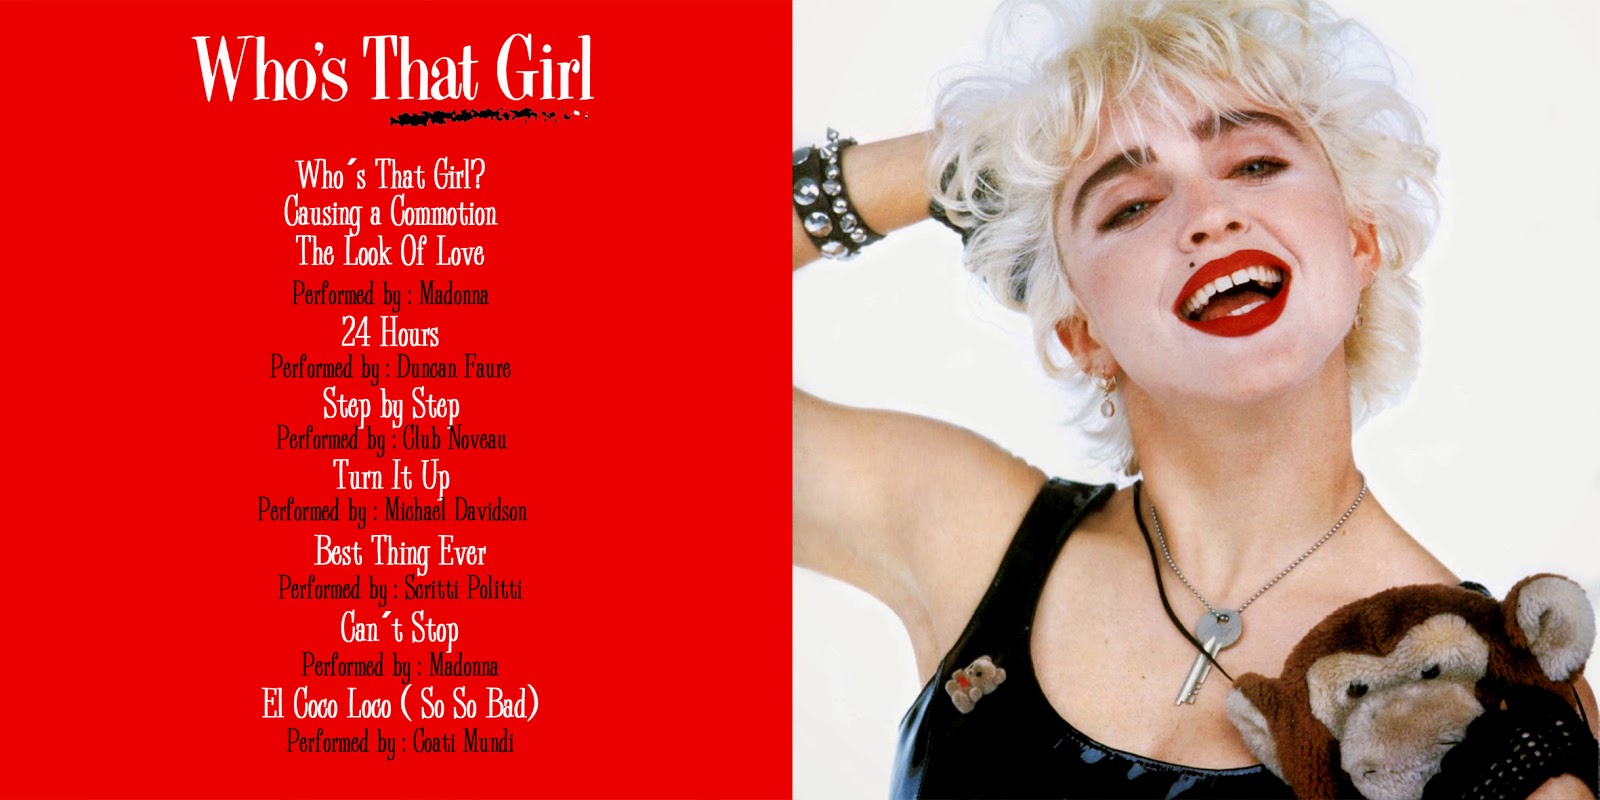 Girl 3 Whos That Dvd-71991